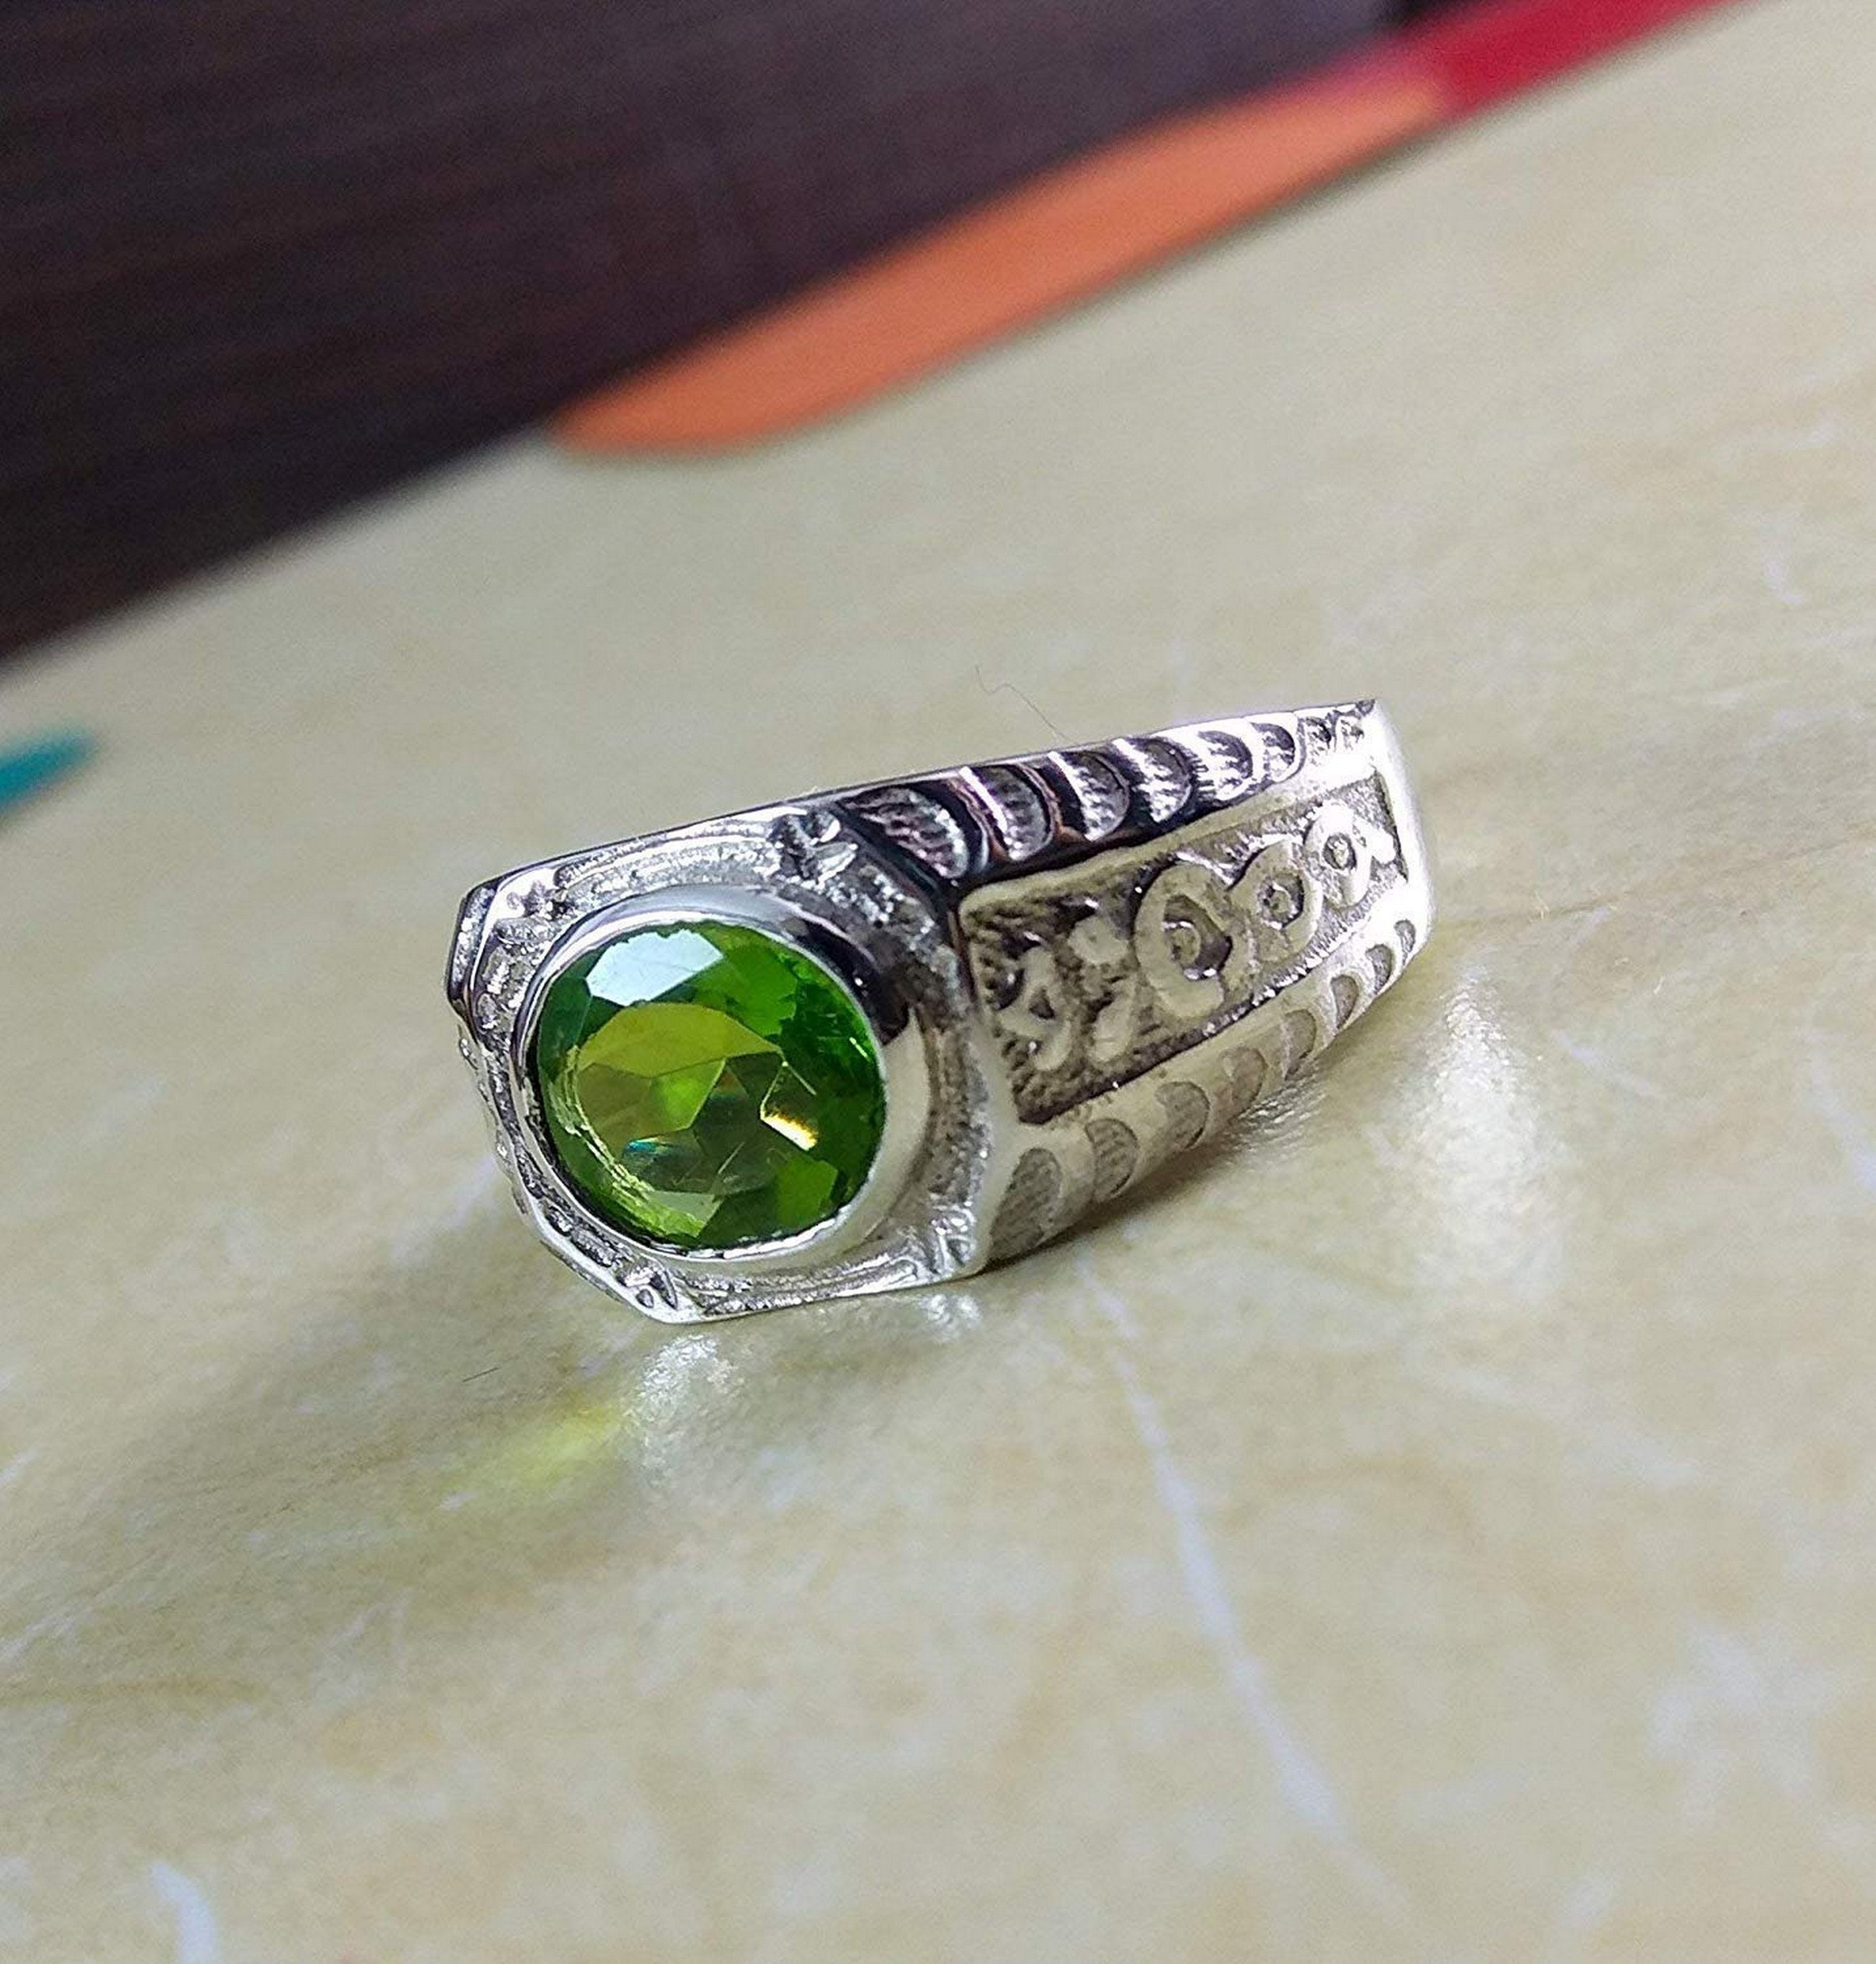 Peridot Men Ring, Solid 925 Sterling Silver, AAA Quality Peridot Ring Gift  Him | eBay